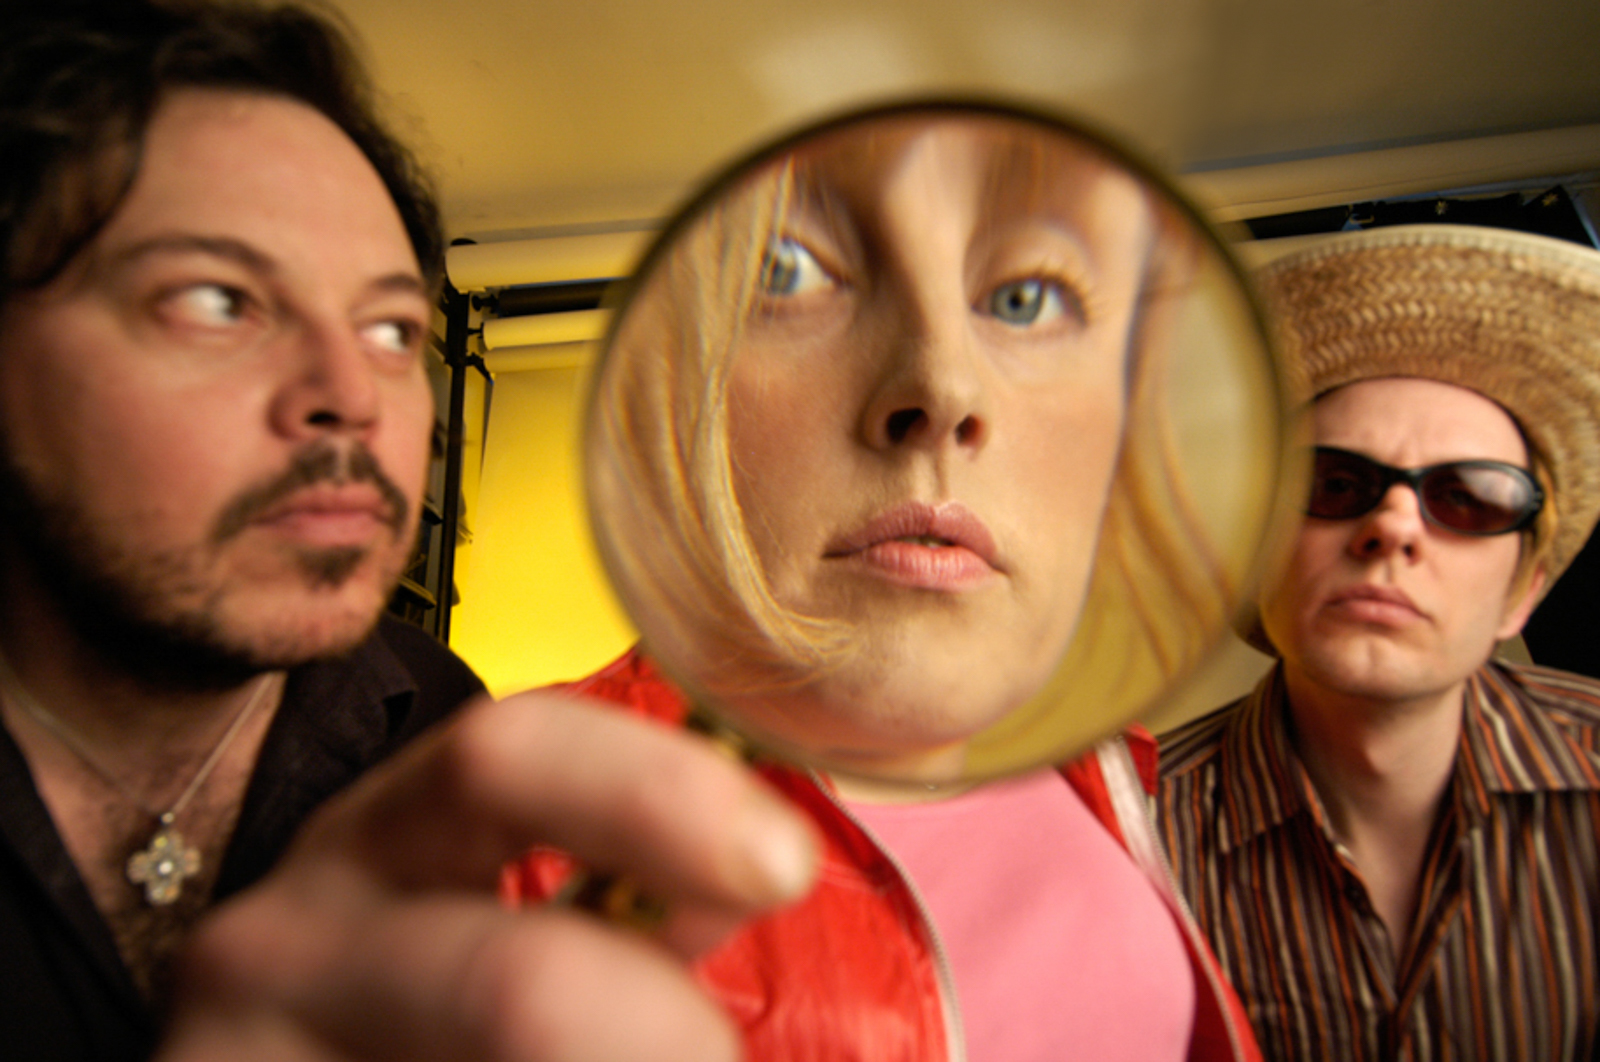 Portrait of band with a man holding a magnifying glass in front of a woman's face